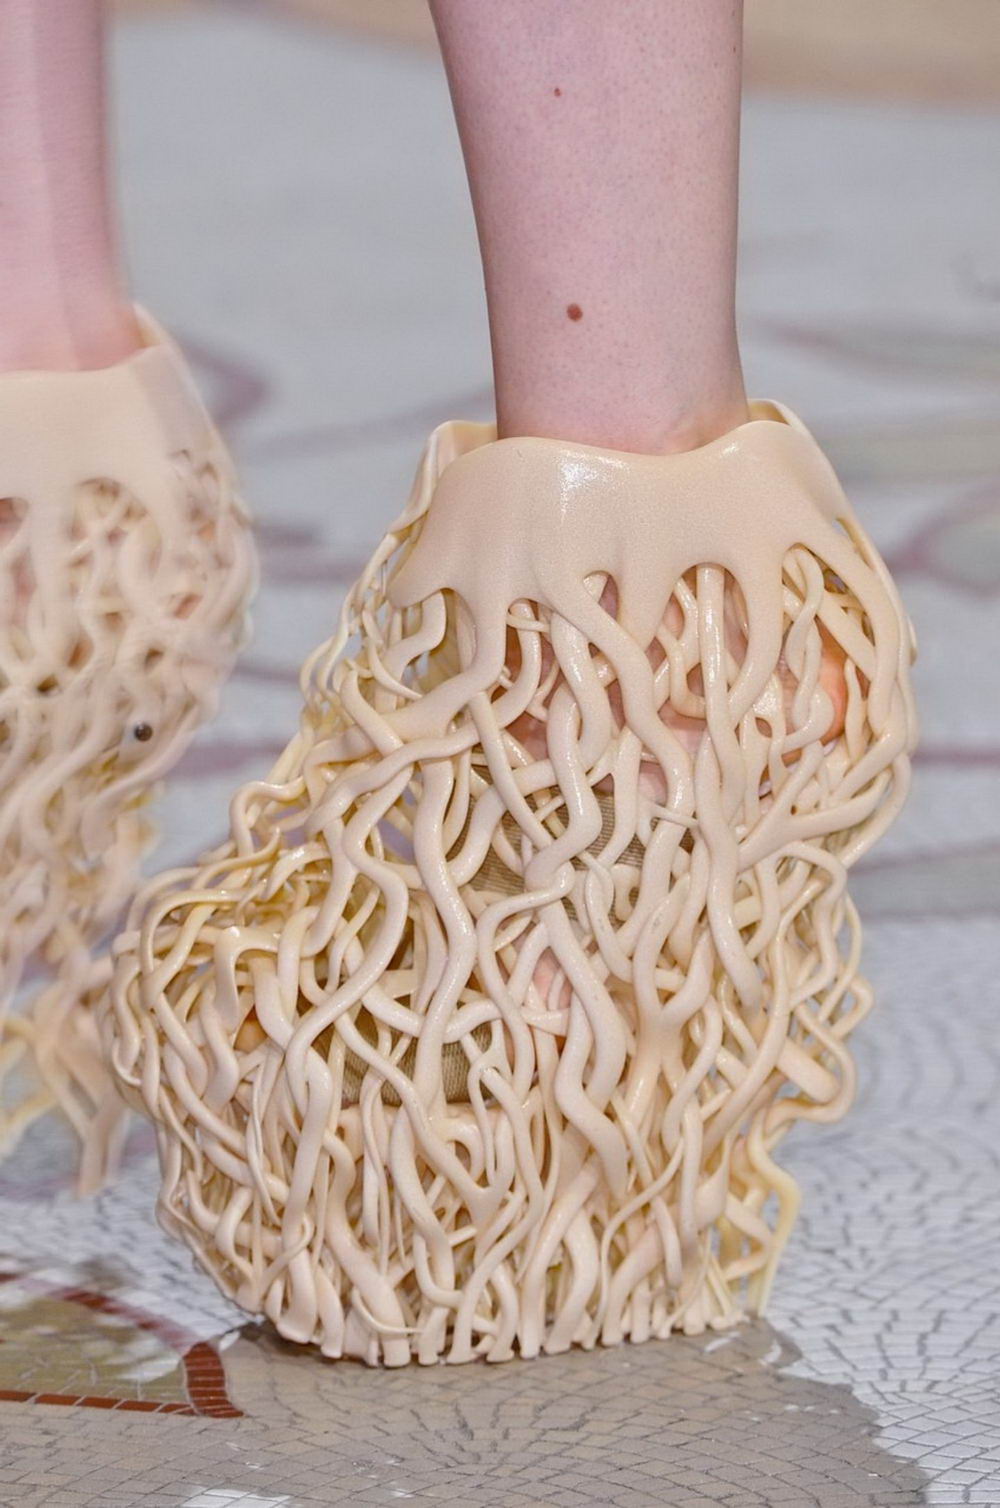 remarkable image of shoes that looks like they're made of noodles